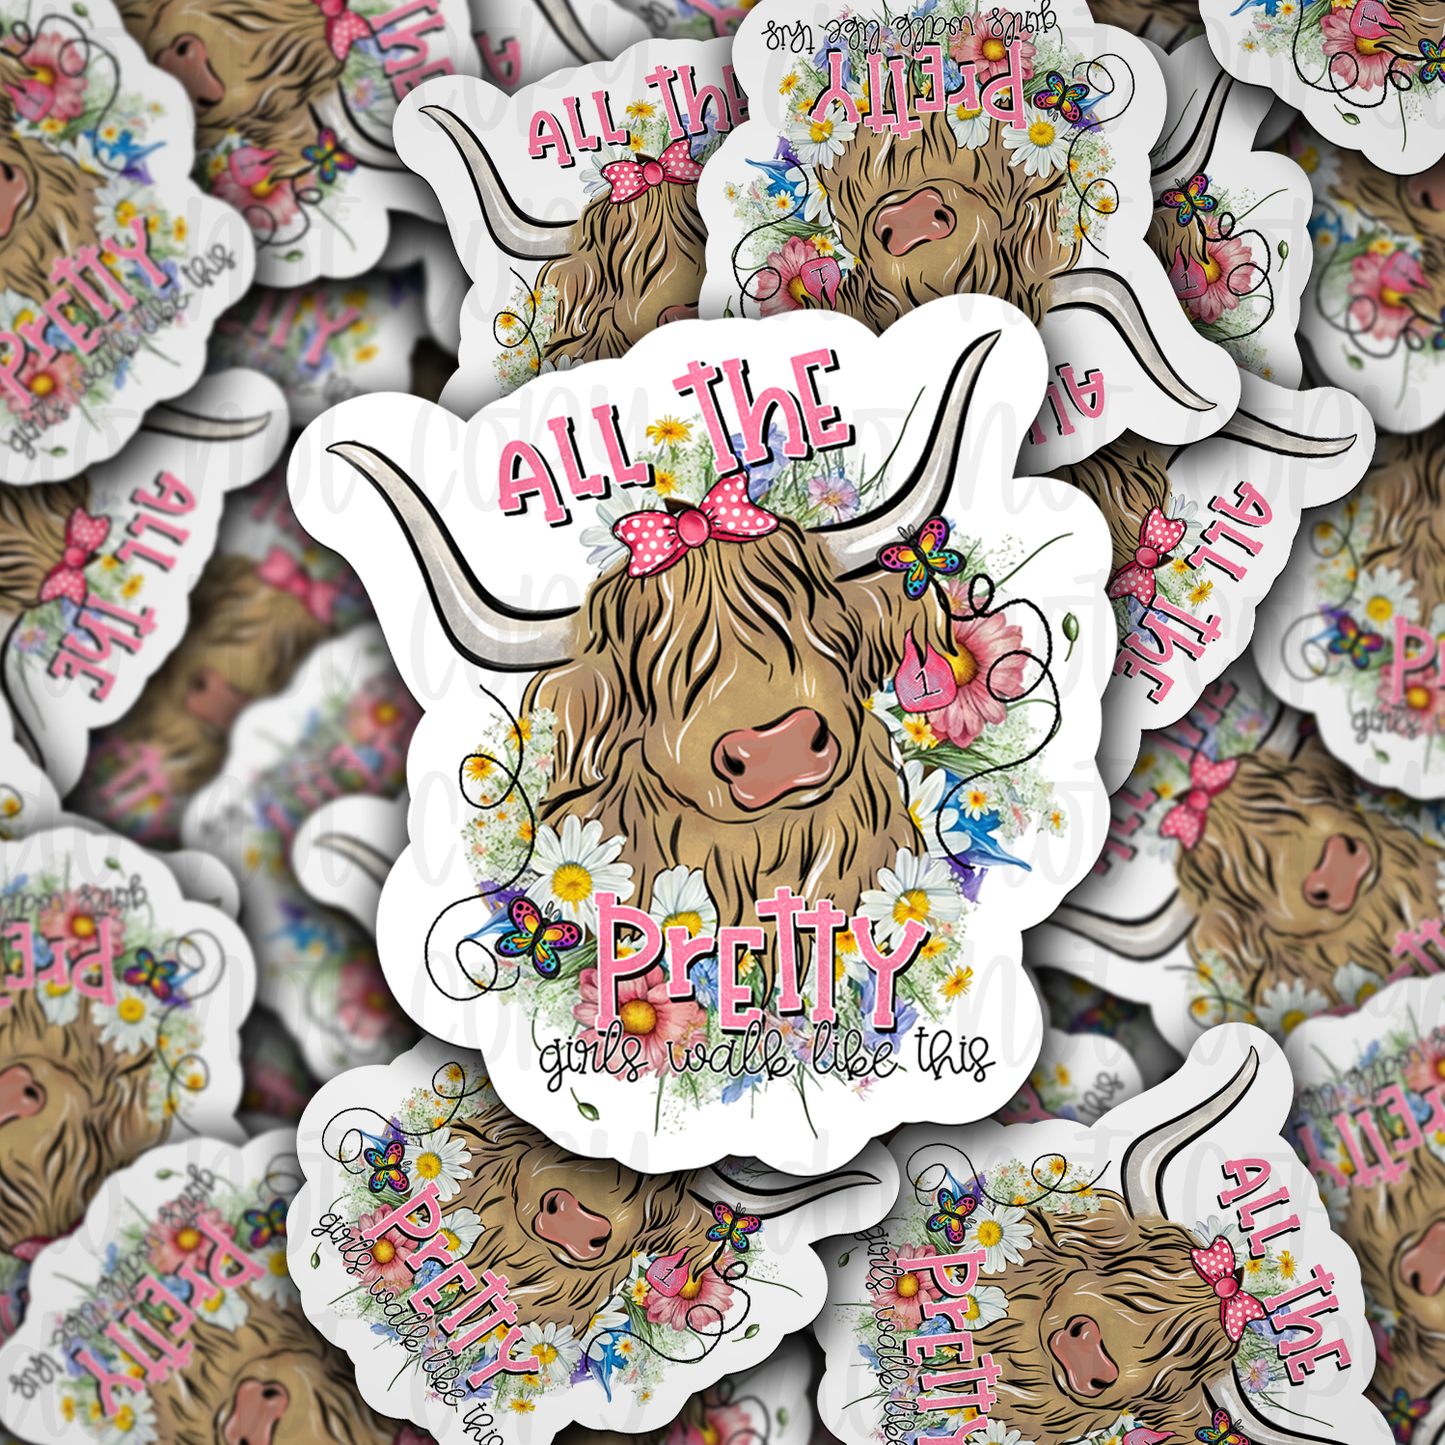 All the pretty girls walk like this cow Die cut sticker 3-5 Business Day TAT